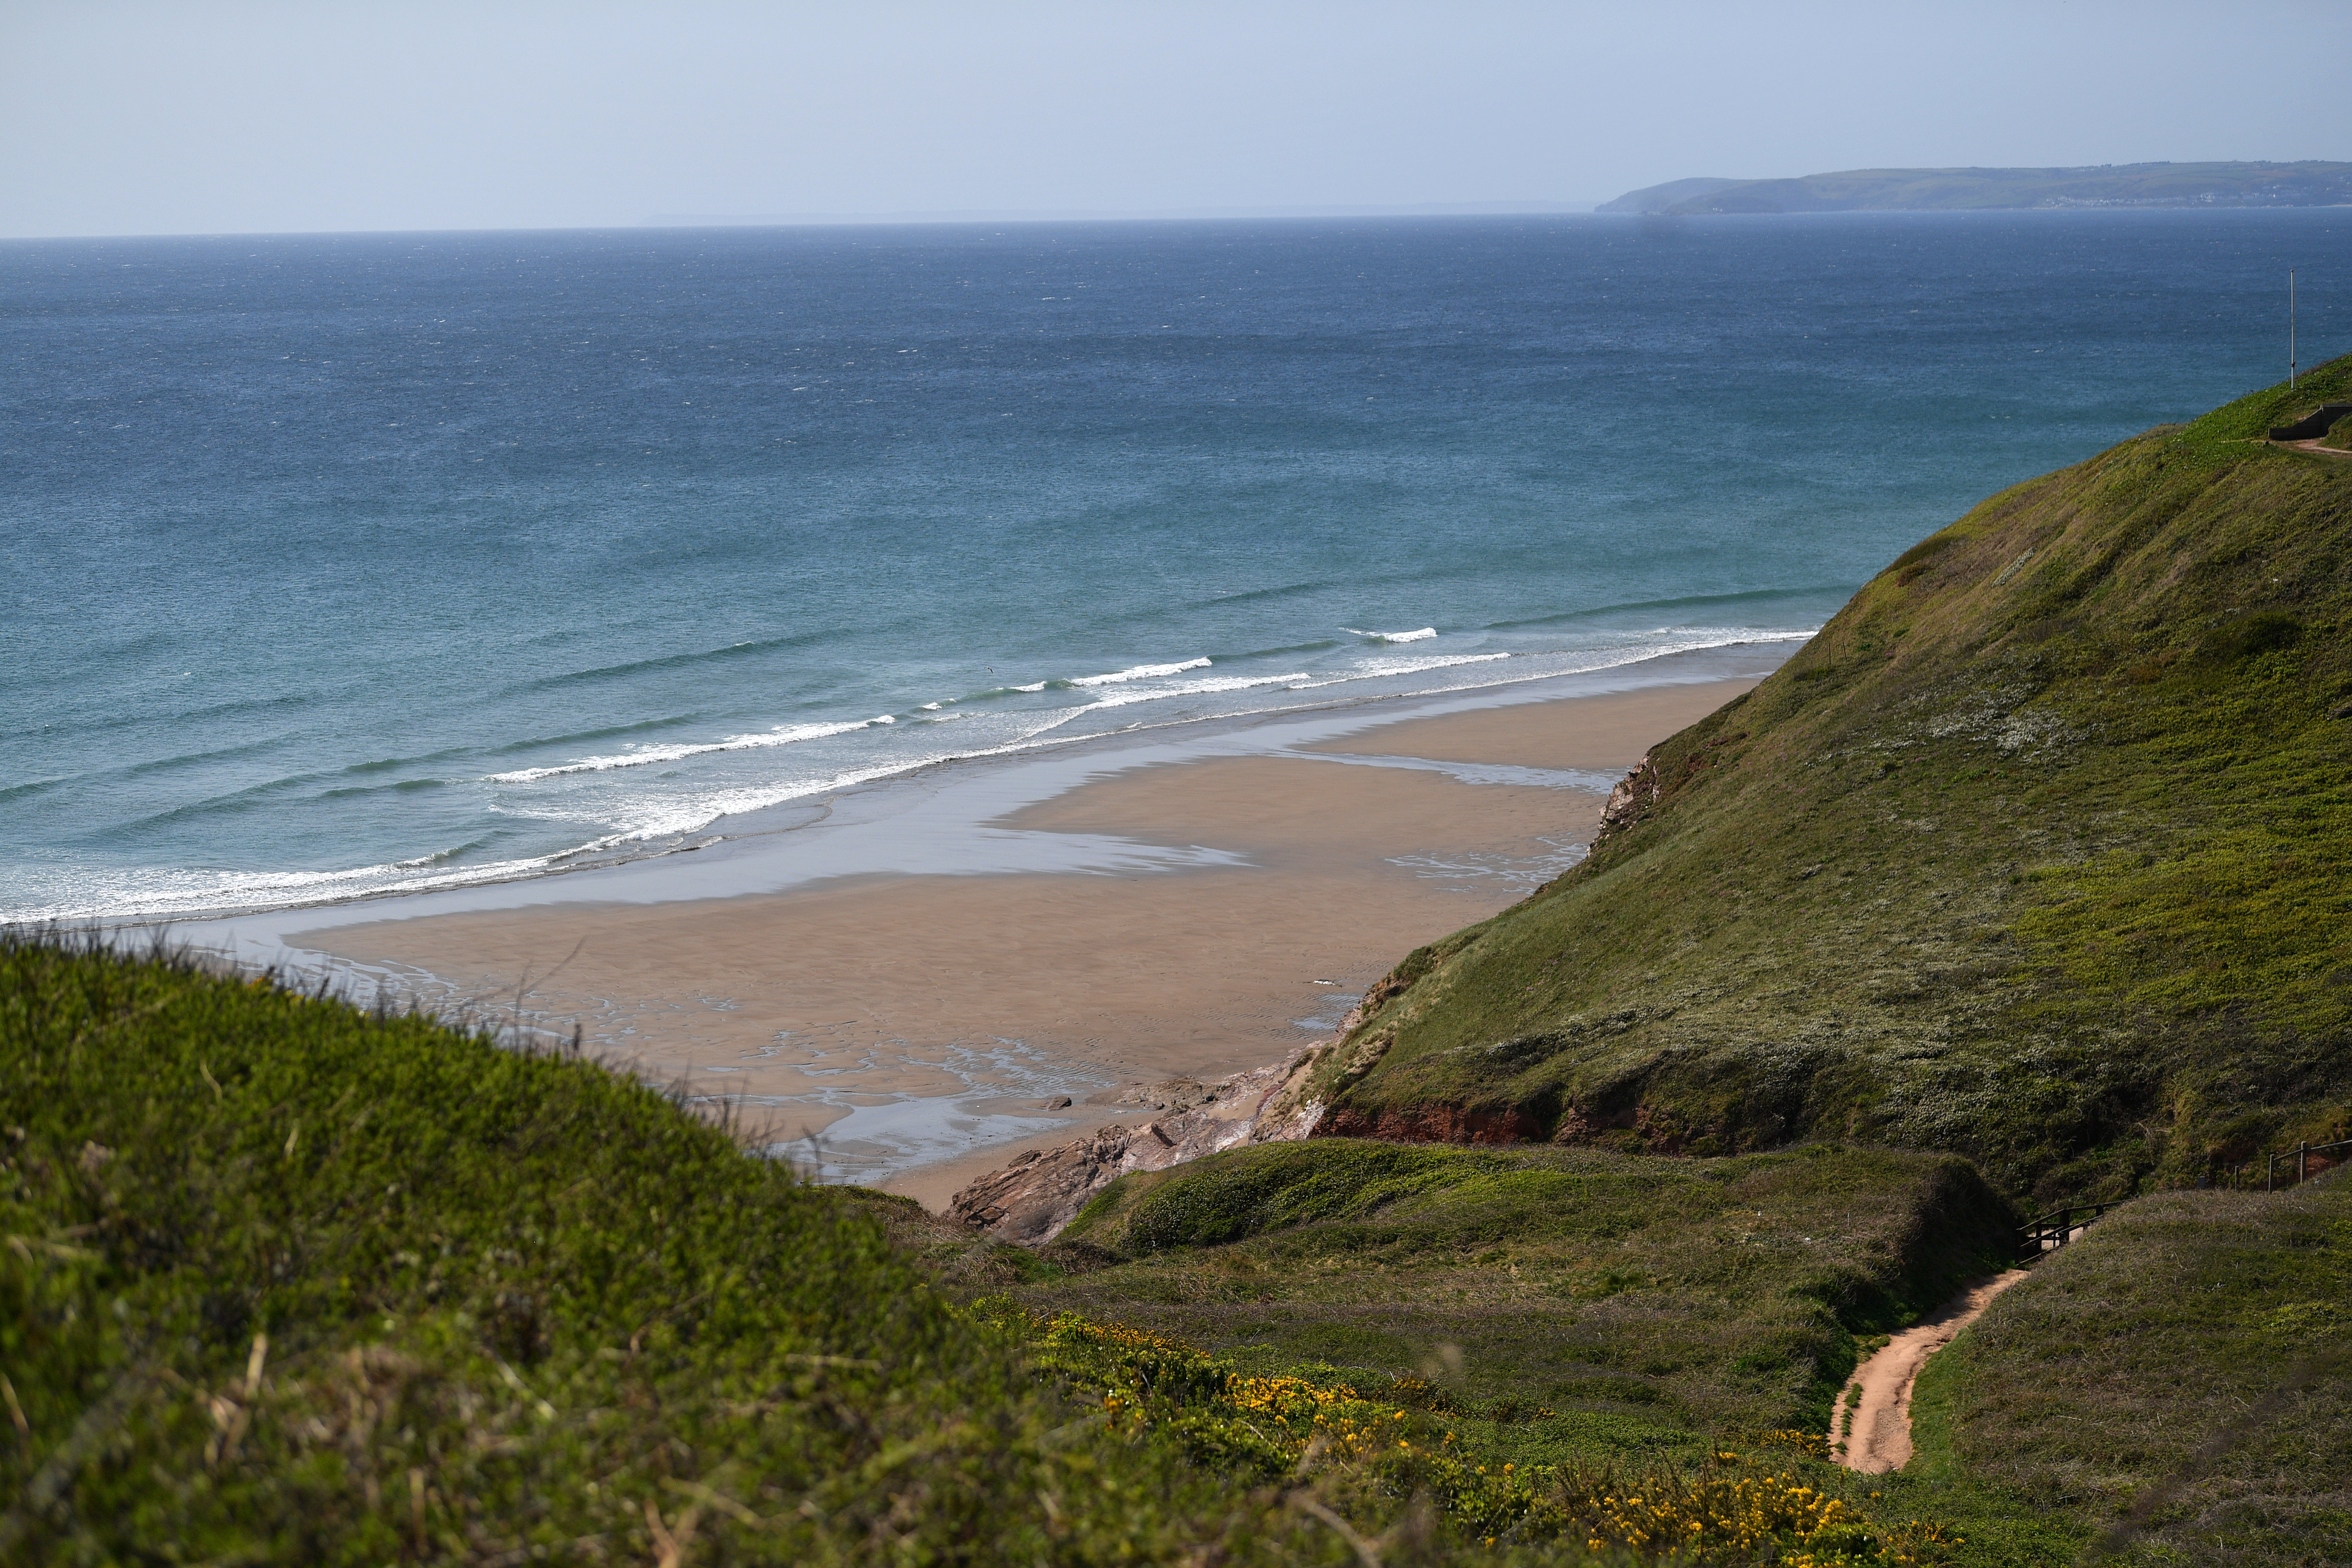 Two divers are presumed dead after failing to resurface from a dive in Whitsand Bay, Cornwall